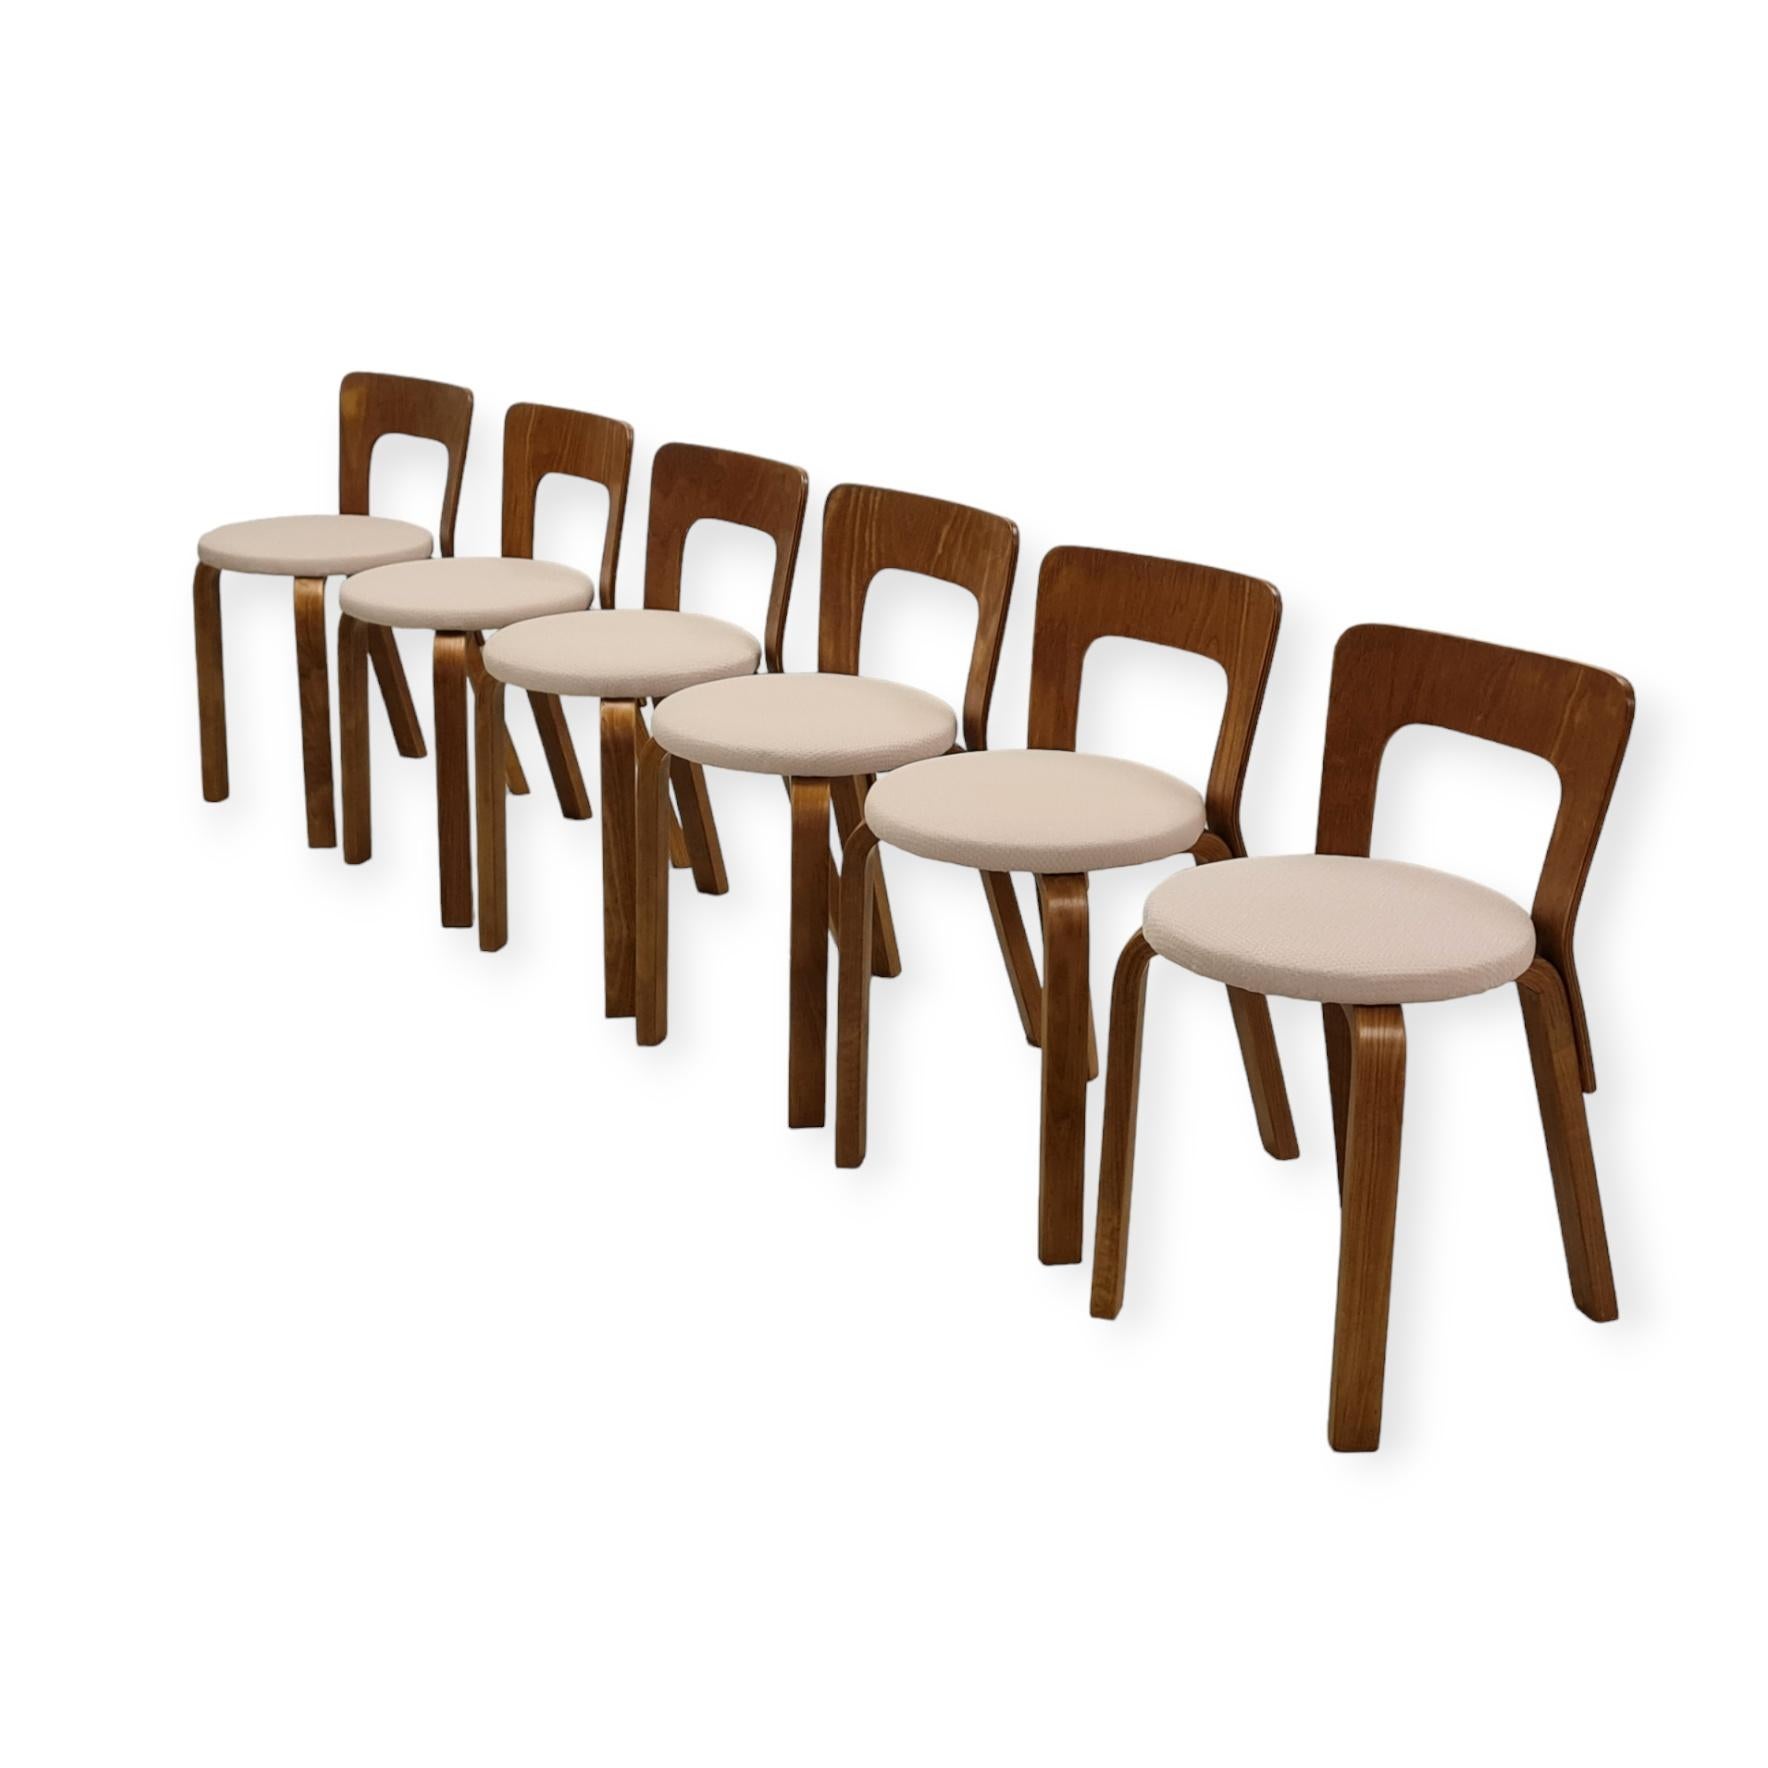 Alvar Aalto designed a huge number of chairs for numerous households and public buildings. These chairs are the ones with the lower version back support model no. 65. The chairs are very sturdy and practical for daily use. This version has also been